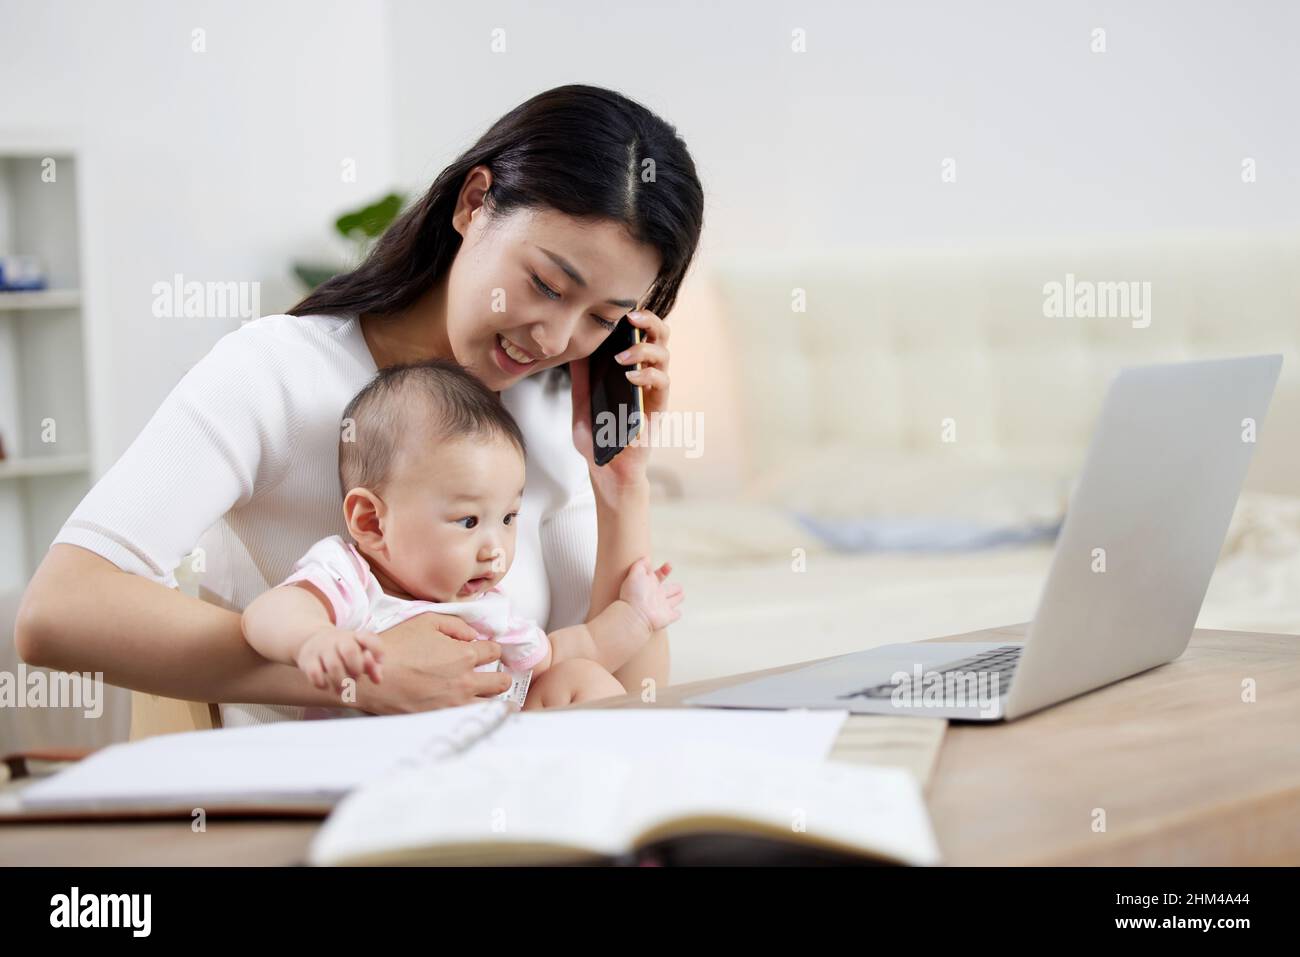 The young mother work while parenting Stock Photo